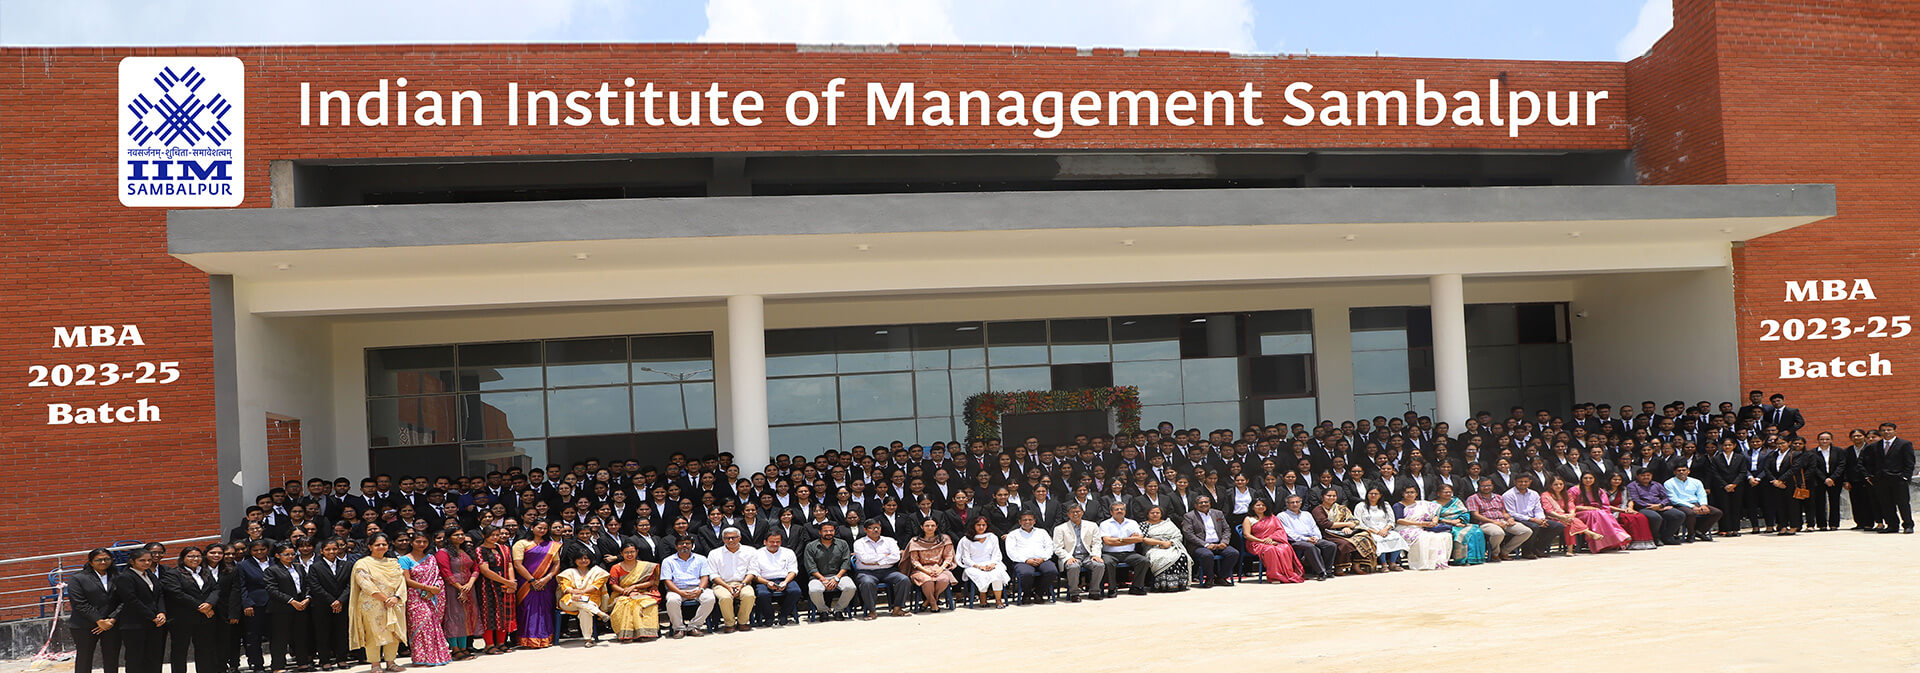  IIM Sambalpur Pioneering Excellence in Management Education and Placements